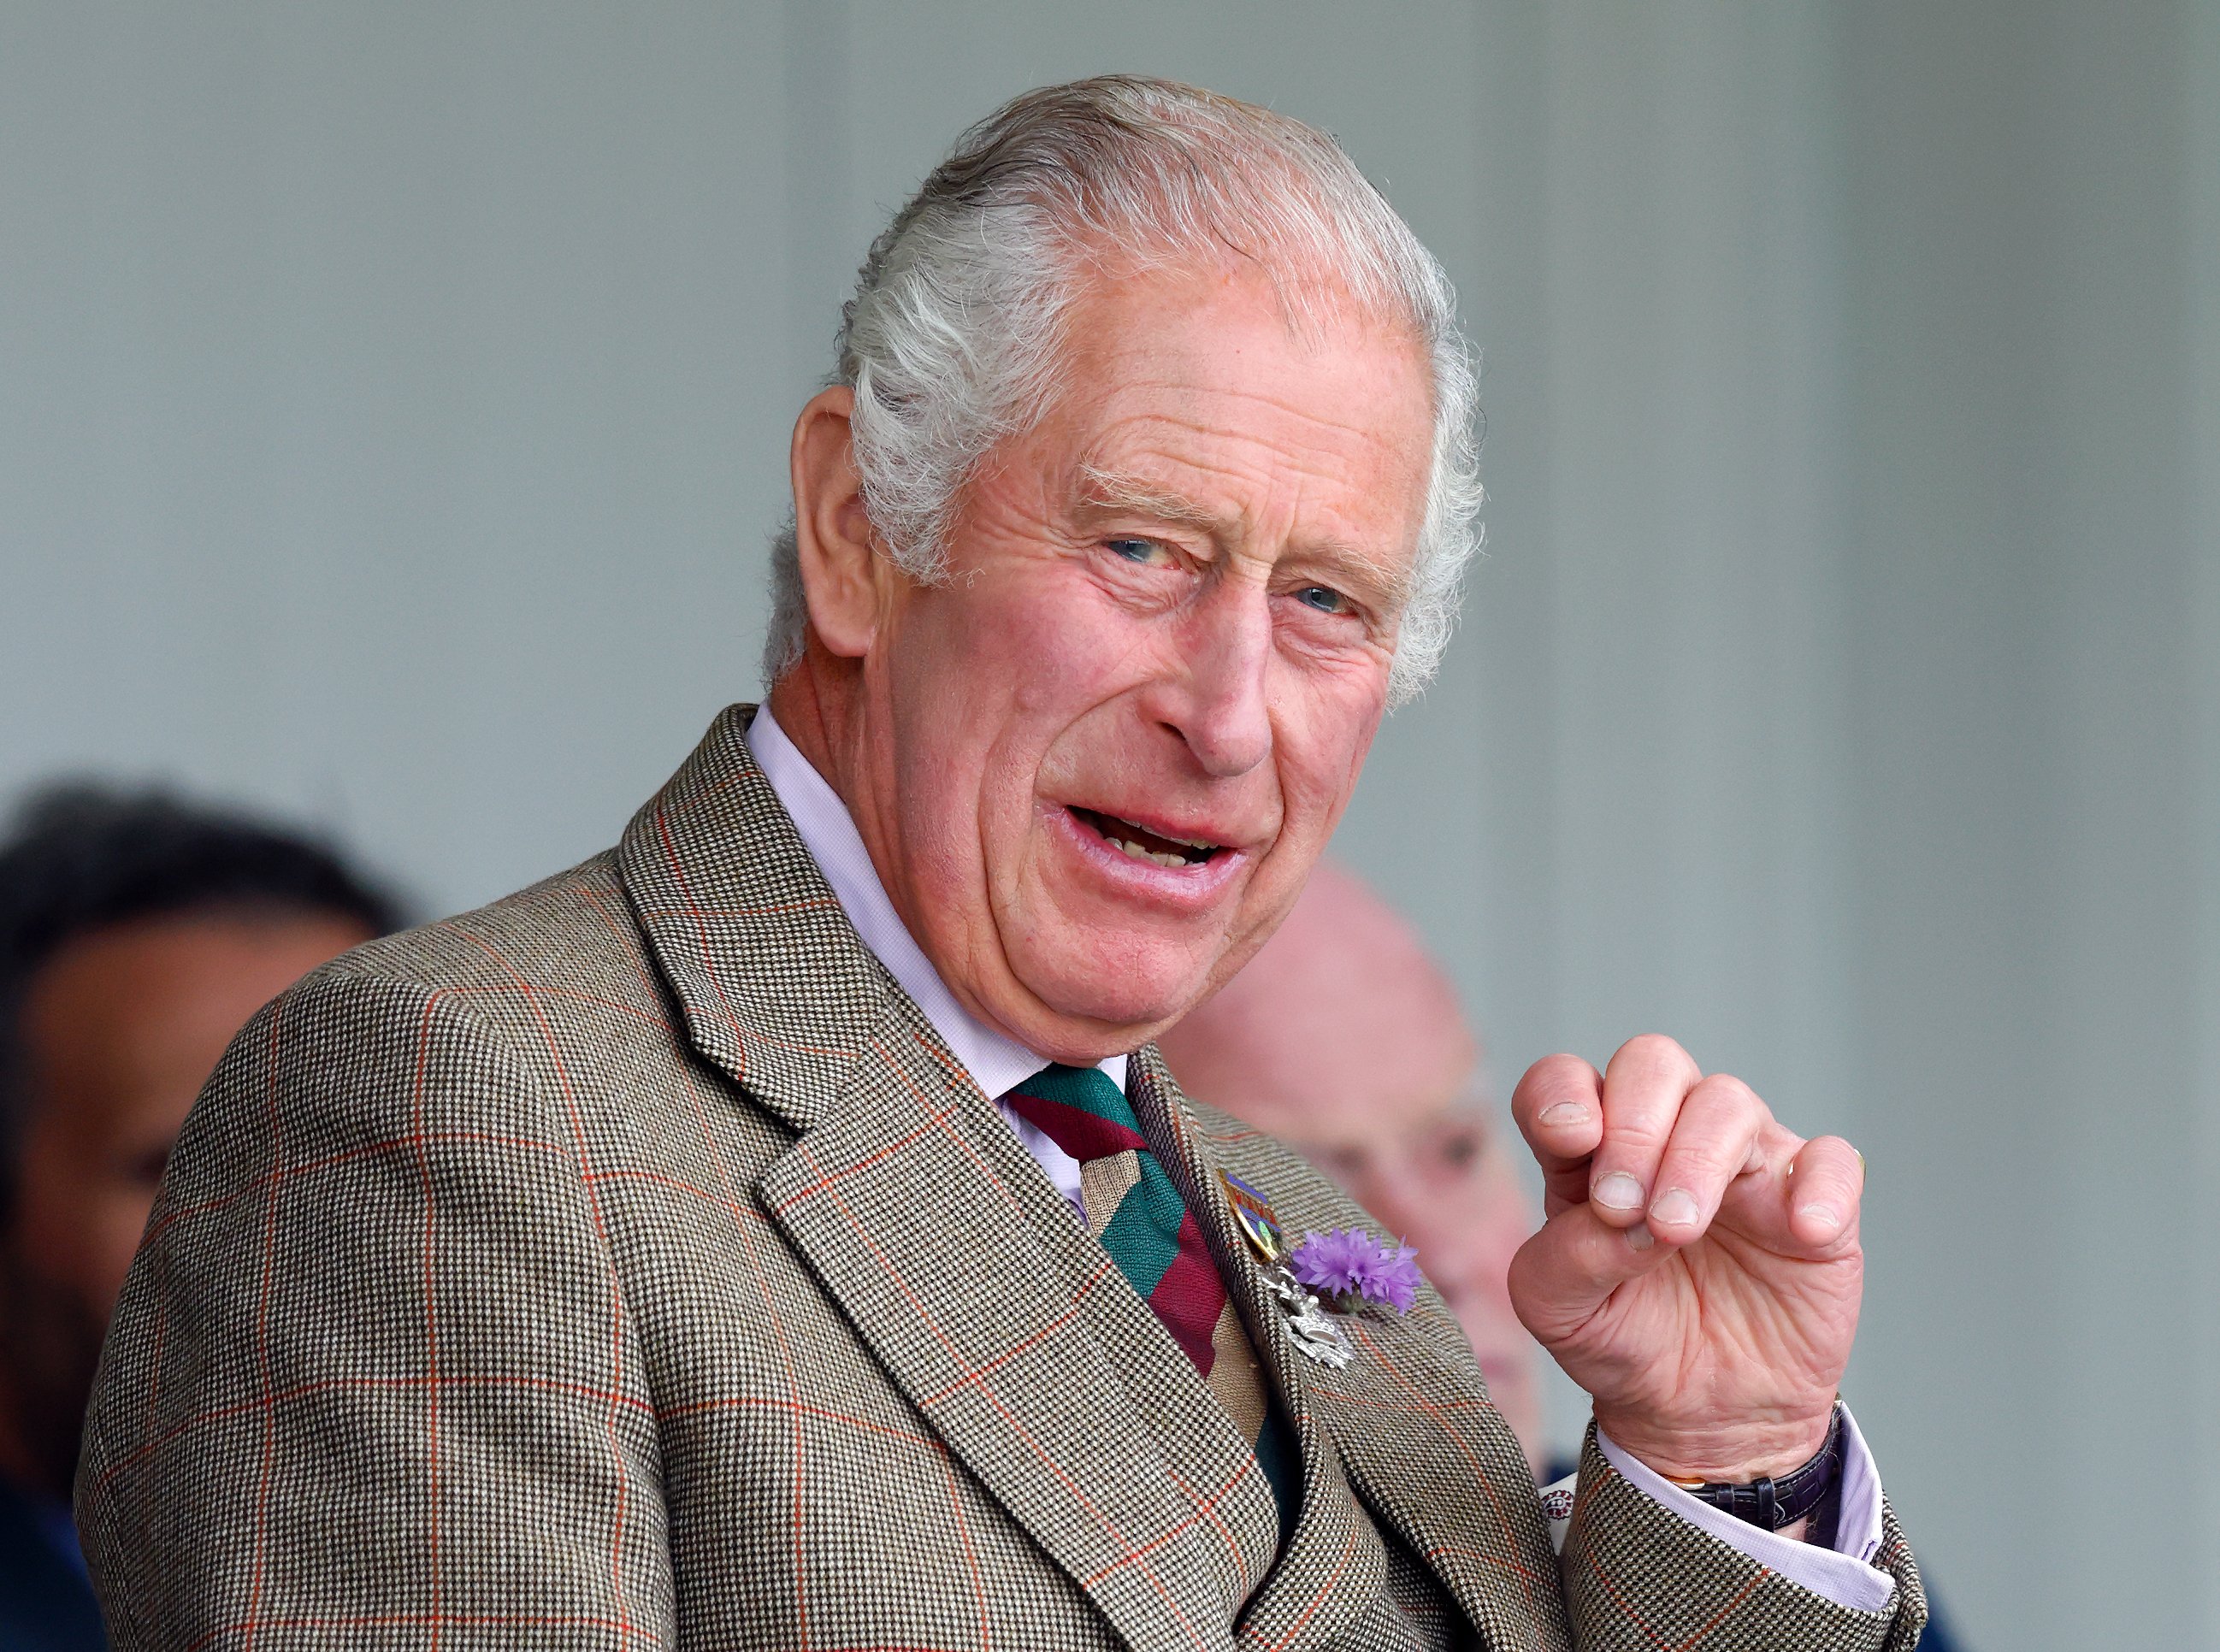 King Charles lll at the Braemar Highland Gathering at The Princess Royal and Duke of Fife Memorial Park on September 3, 2022 in Braemar, Scotland. | Source: Getty Images